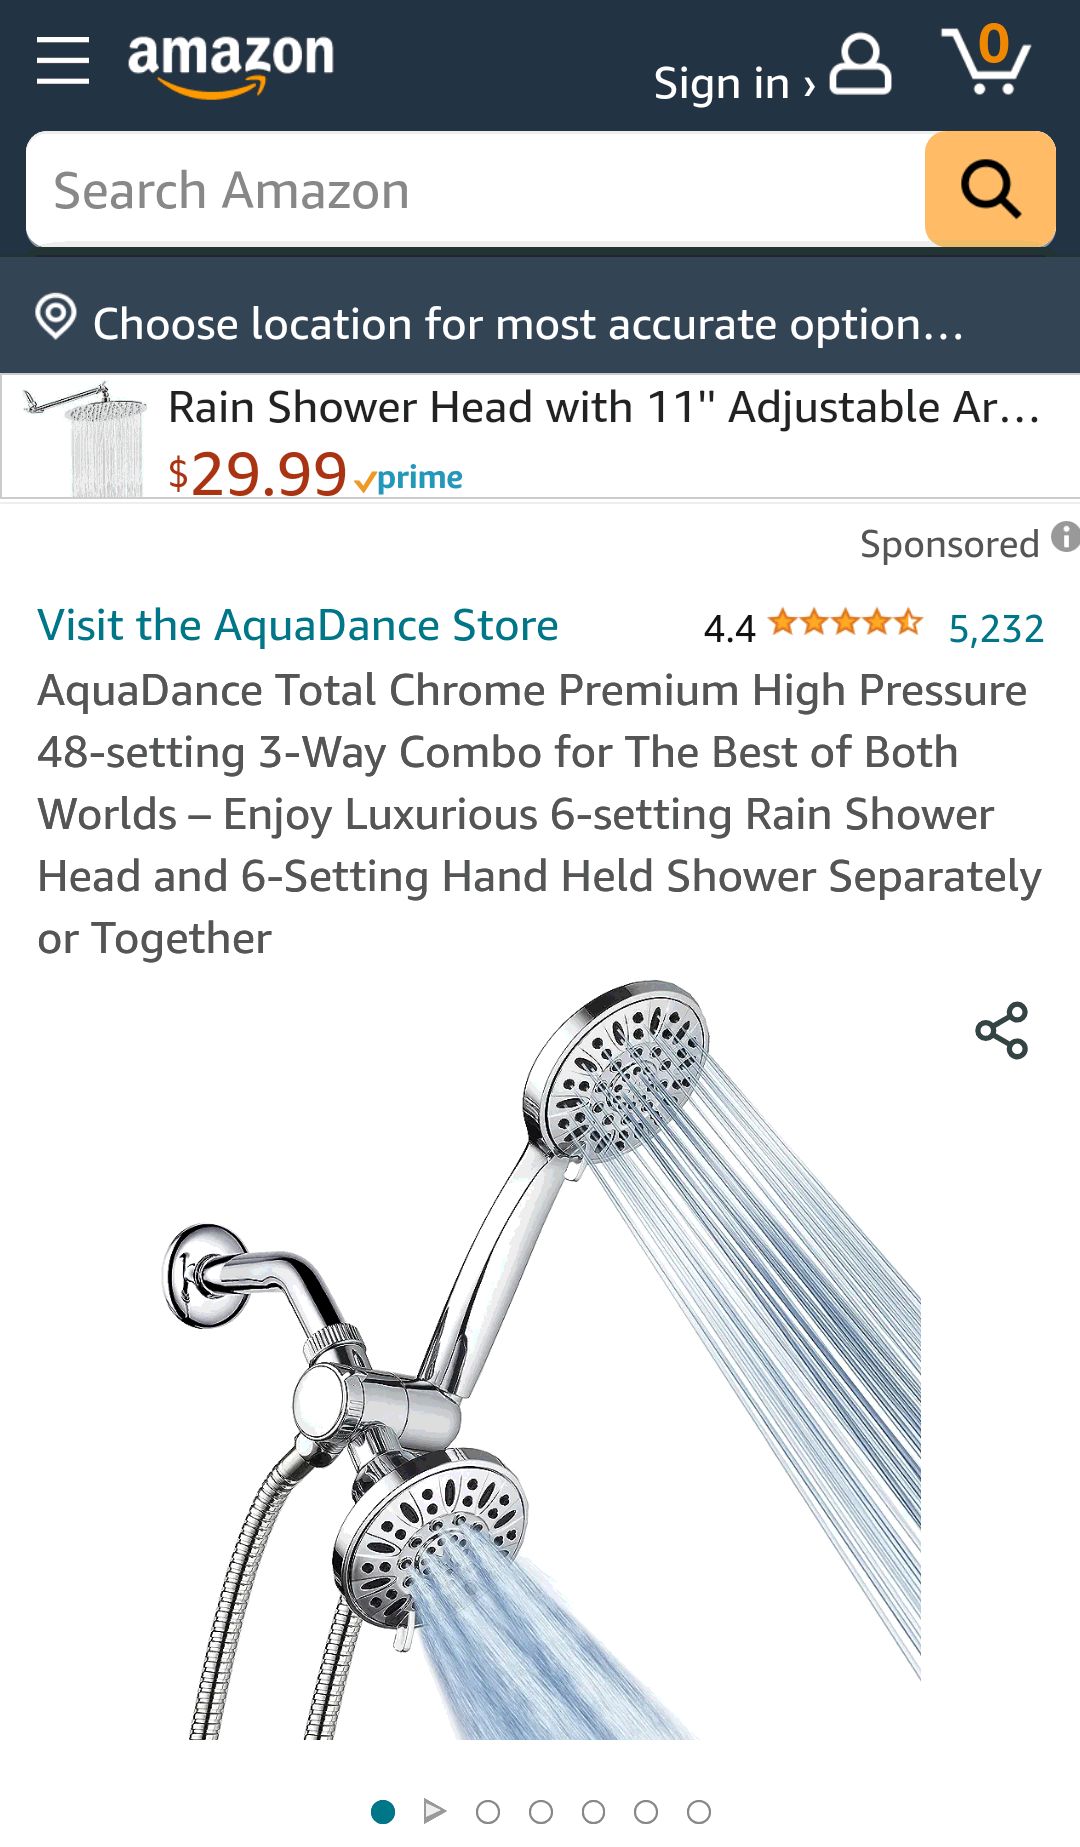 AquaDance Total Chrome Premium High Pressure 48-setting 3-Way Combo for The Best of Both Worlds – Enjoy Luxurious 6-setting Rain Shower Head and 6-Setting Hand Held Shower Separately or Together : Pat